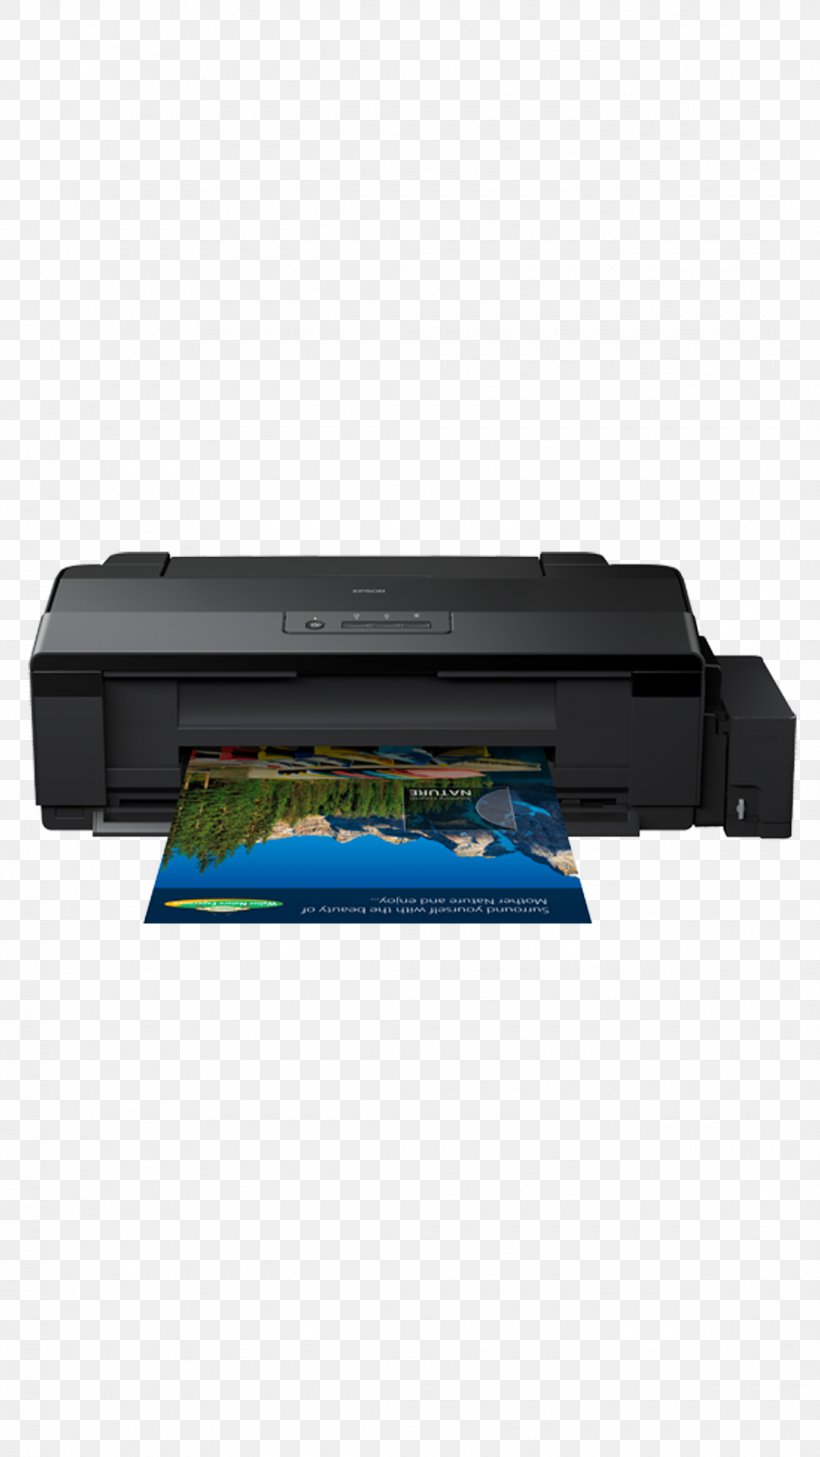 Inkjet Printing Printer Epson, PNG, 1080x1920px, Inkjet Printing, Color Printing, Continuous Ink System, Dots Per Inch, Dyesublimation Printer Download Free